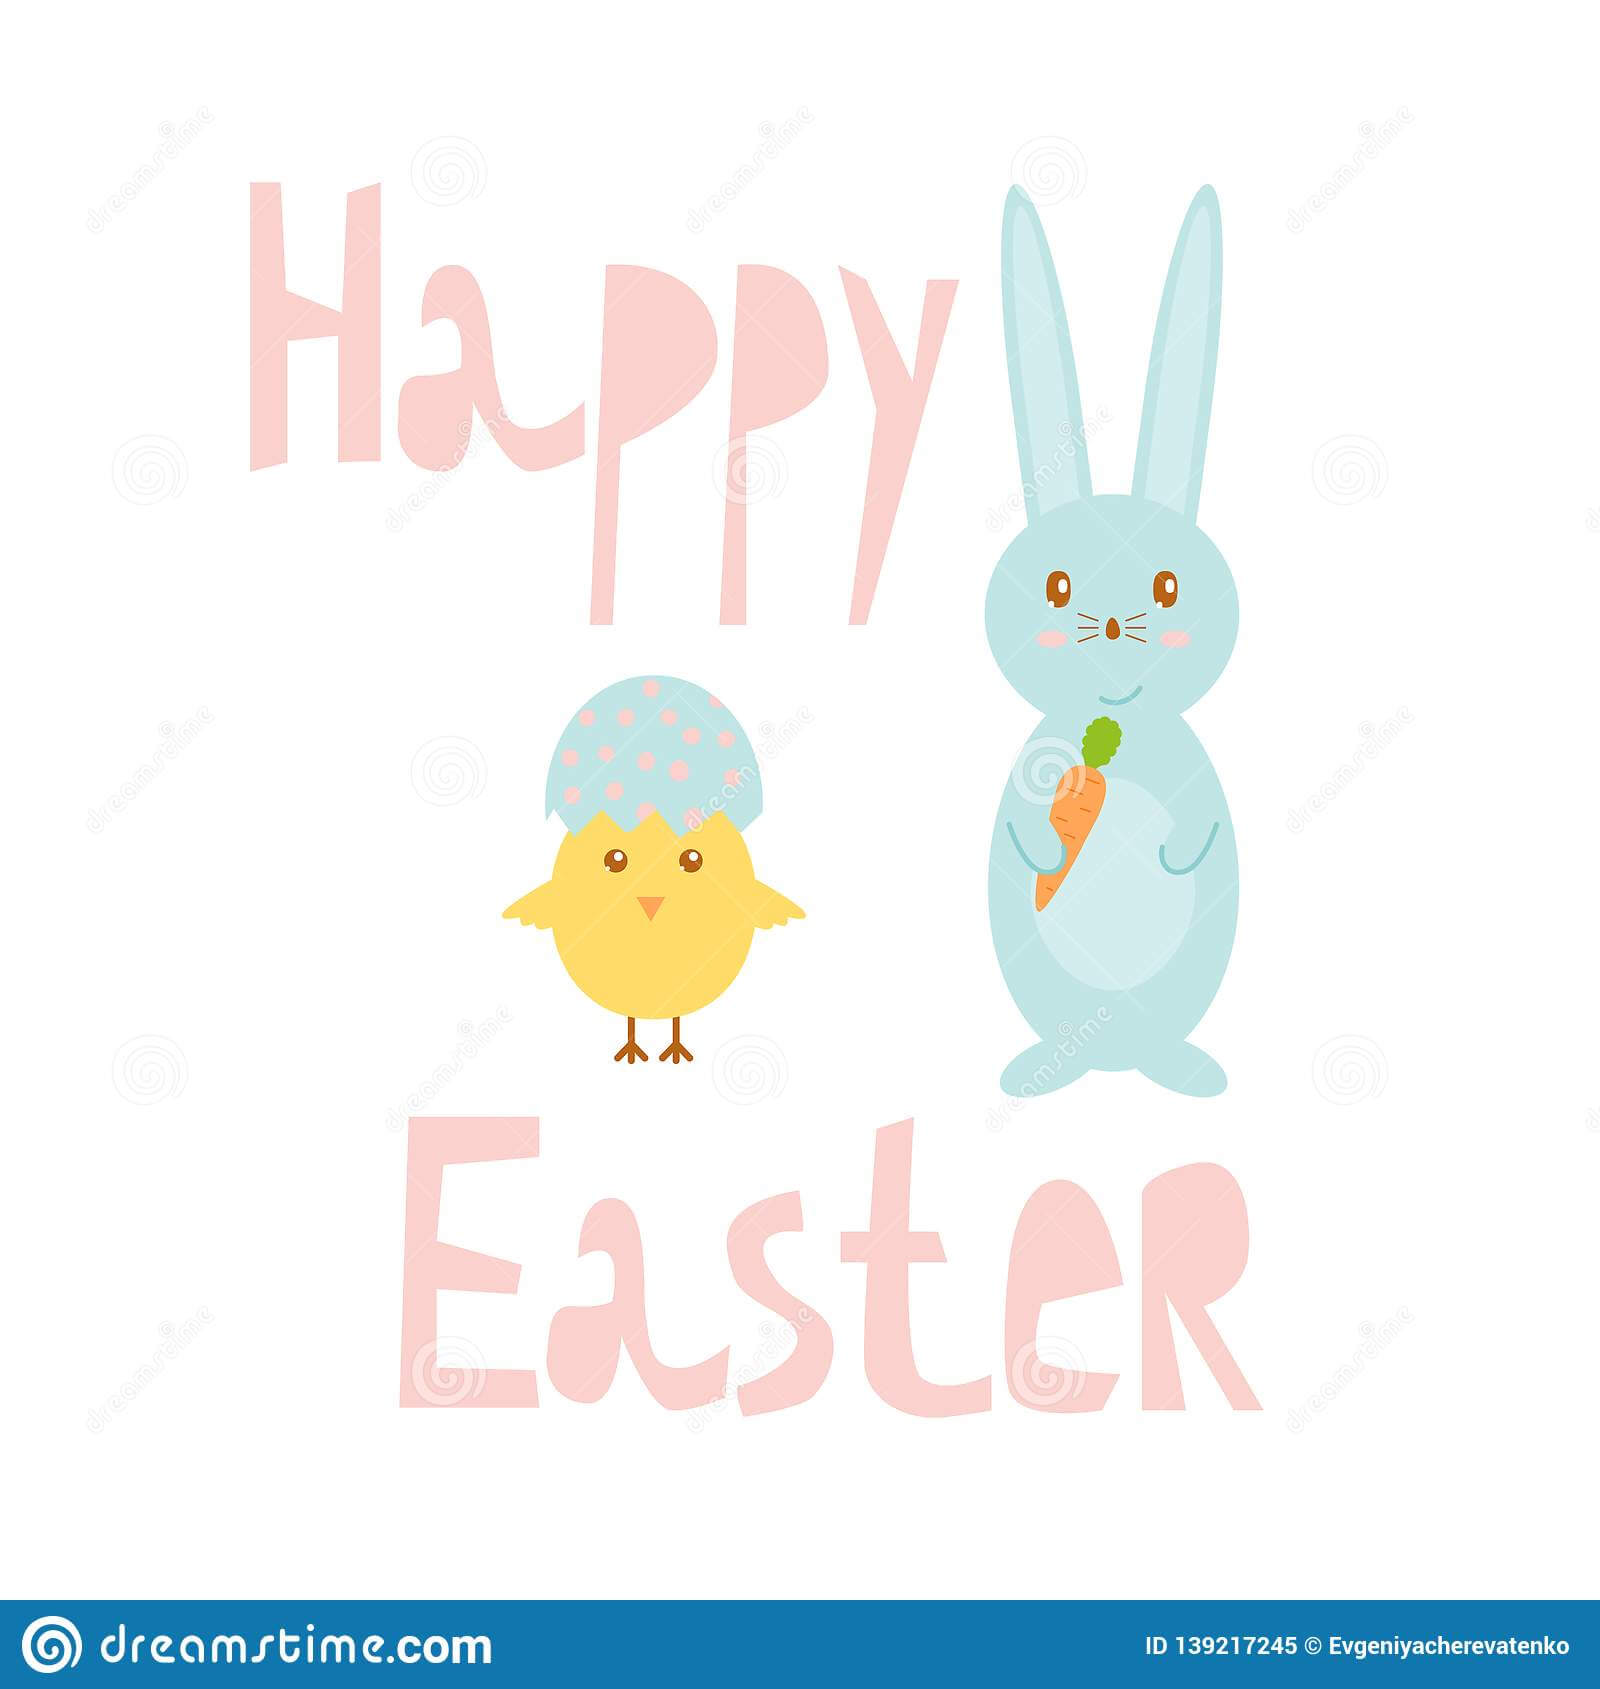 Happy Easter Greeting Card Template With Bunny And Chick With Regard To Easter Chick Card Template